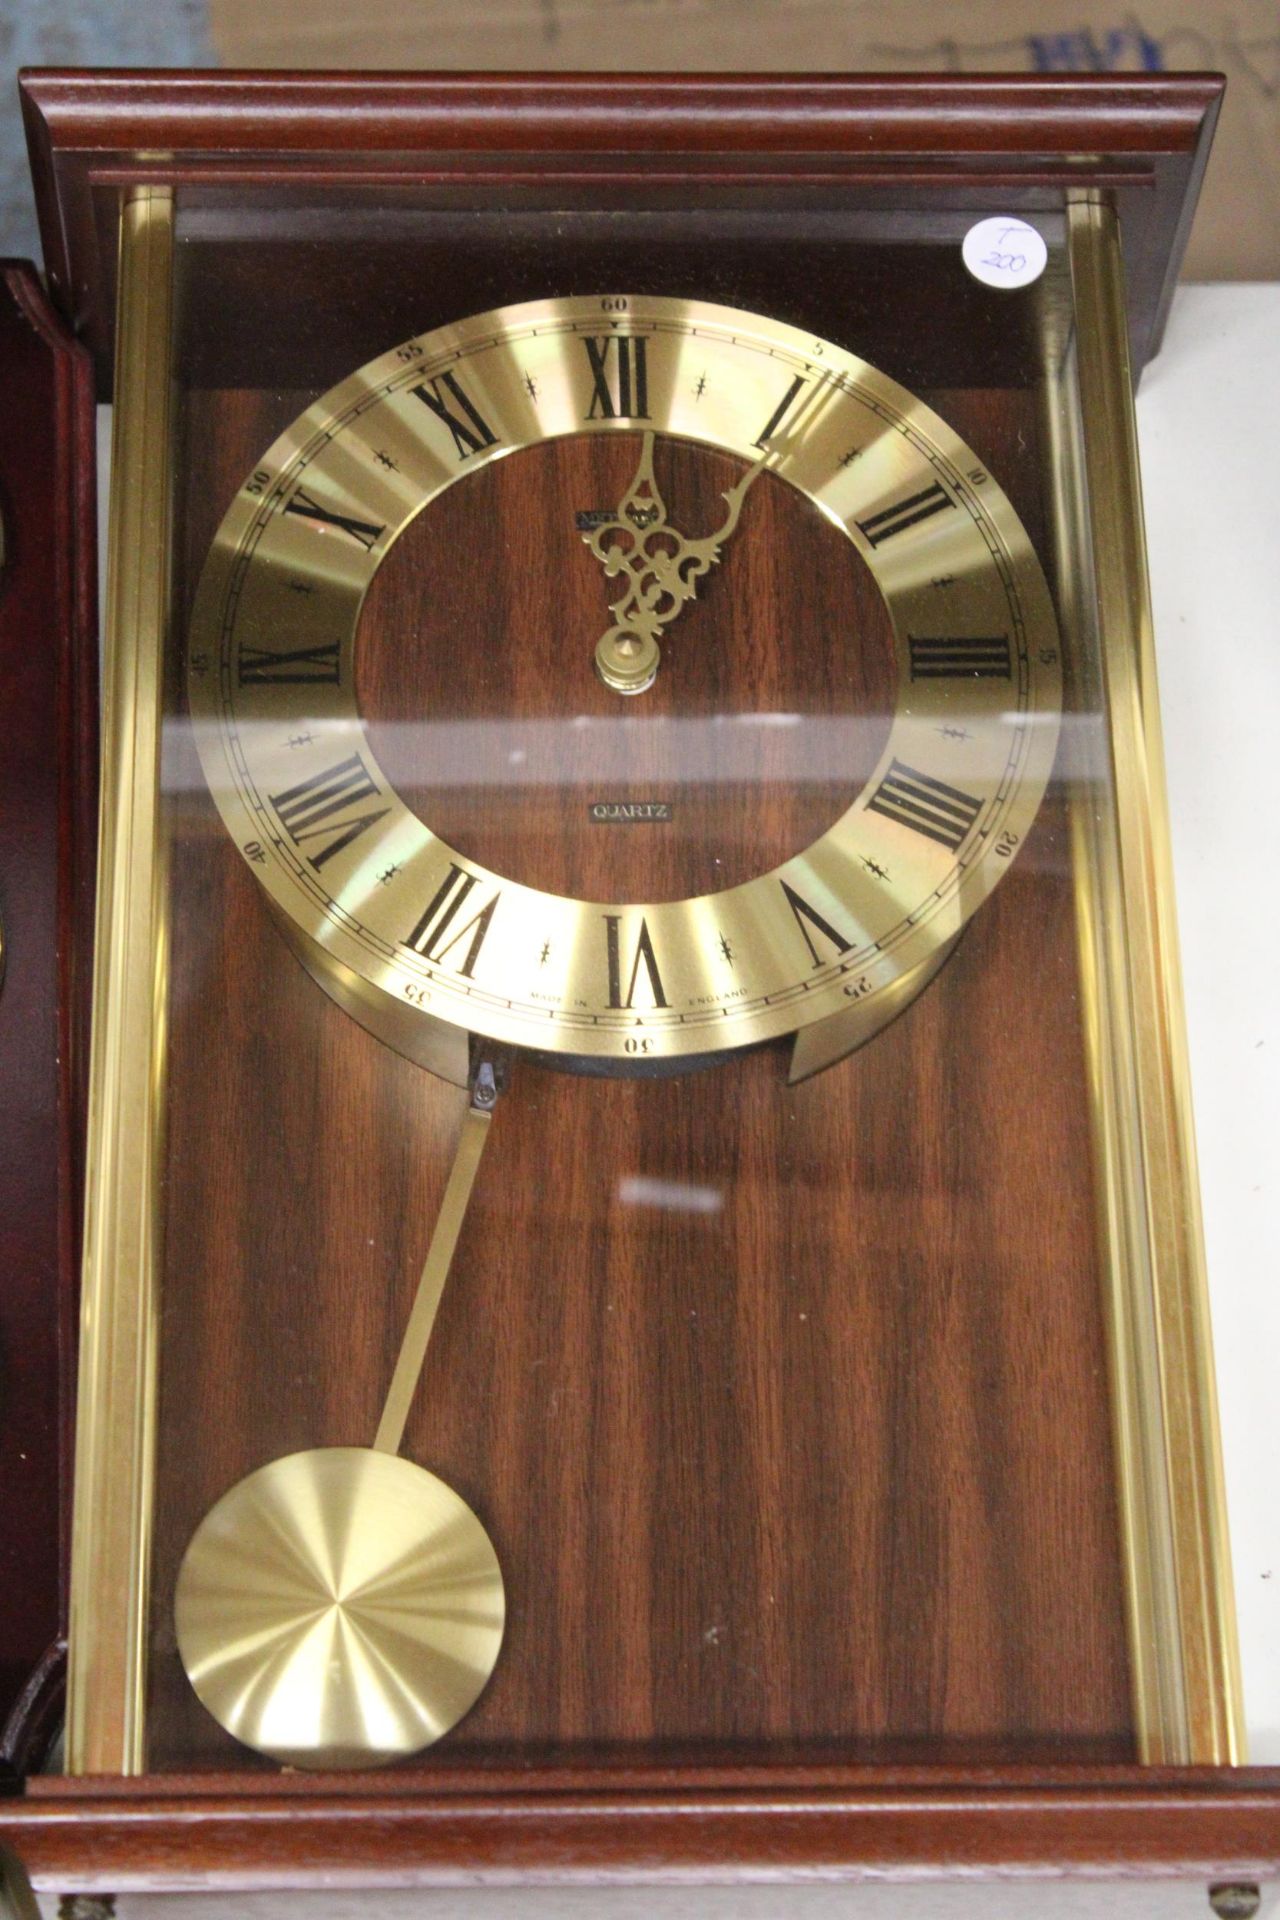 A METAMAC QUARTZ WALL CLOCK, A CARRIAGE CLOCK AND A BAROMETER, CLOCK AND THERMOMETER IN A WOODEN - Image 2 of 6